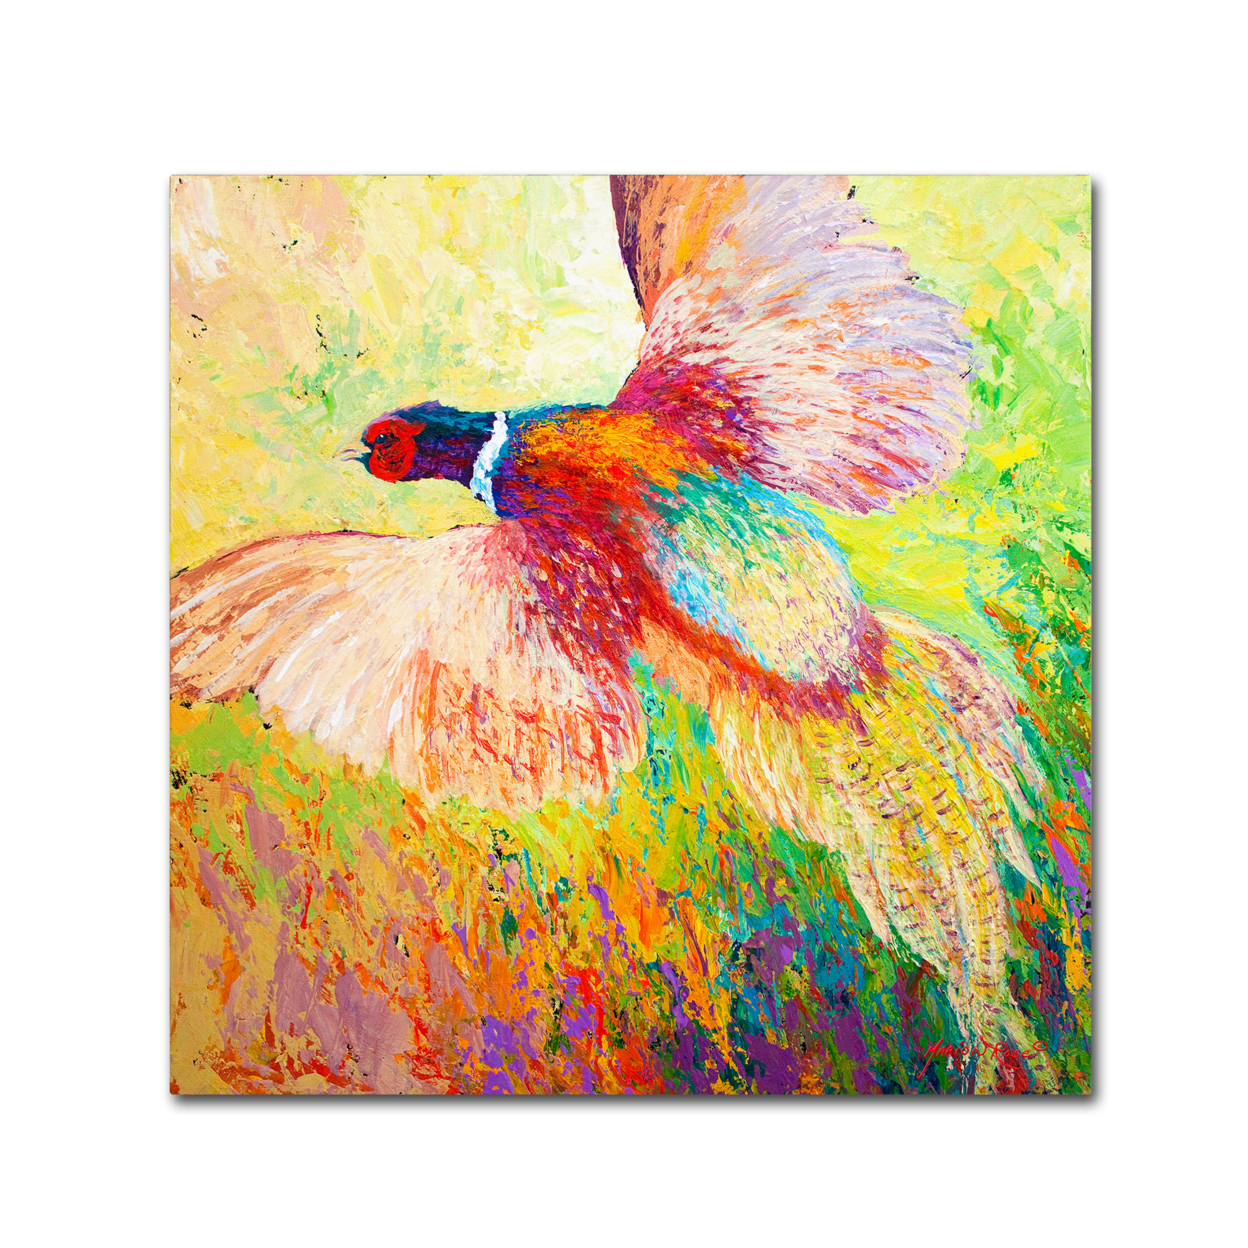 Marion Rose 'Pheasant 1' Ready To Hang Canvas Art 24 X 24 Inches Made In USA